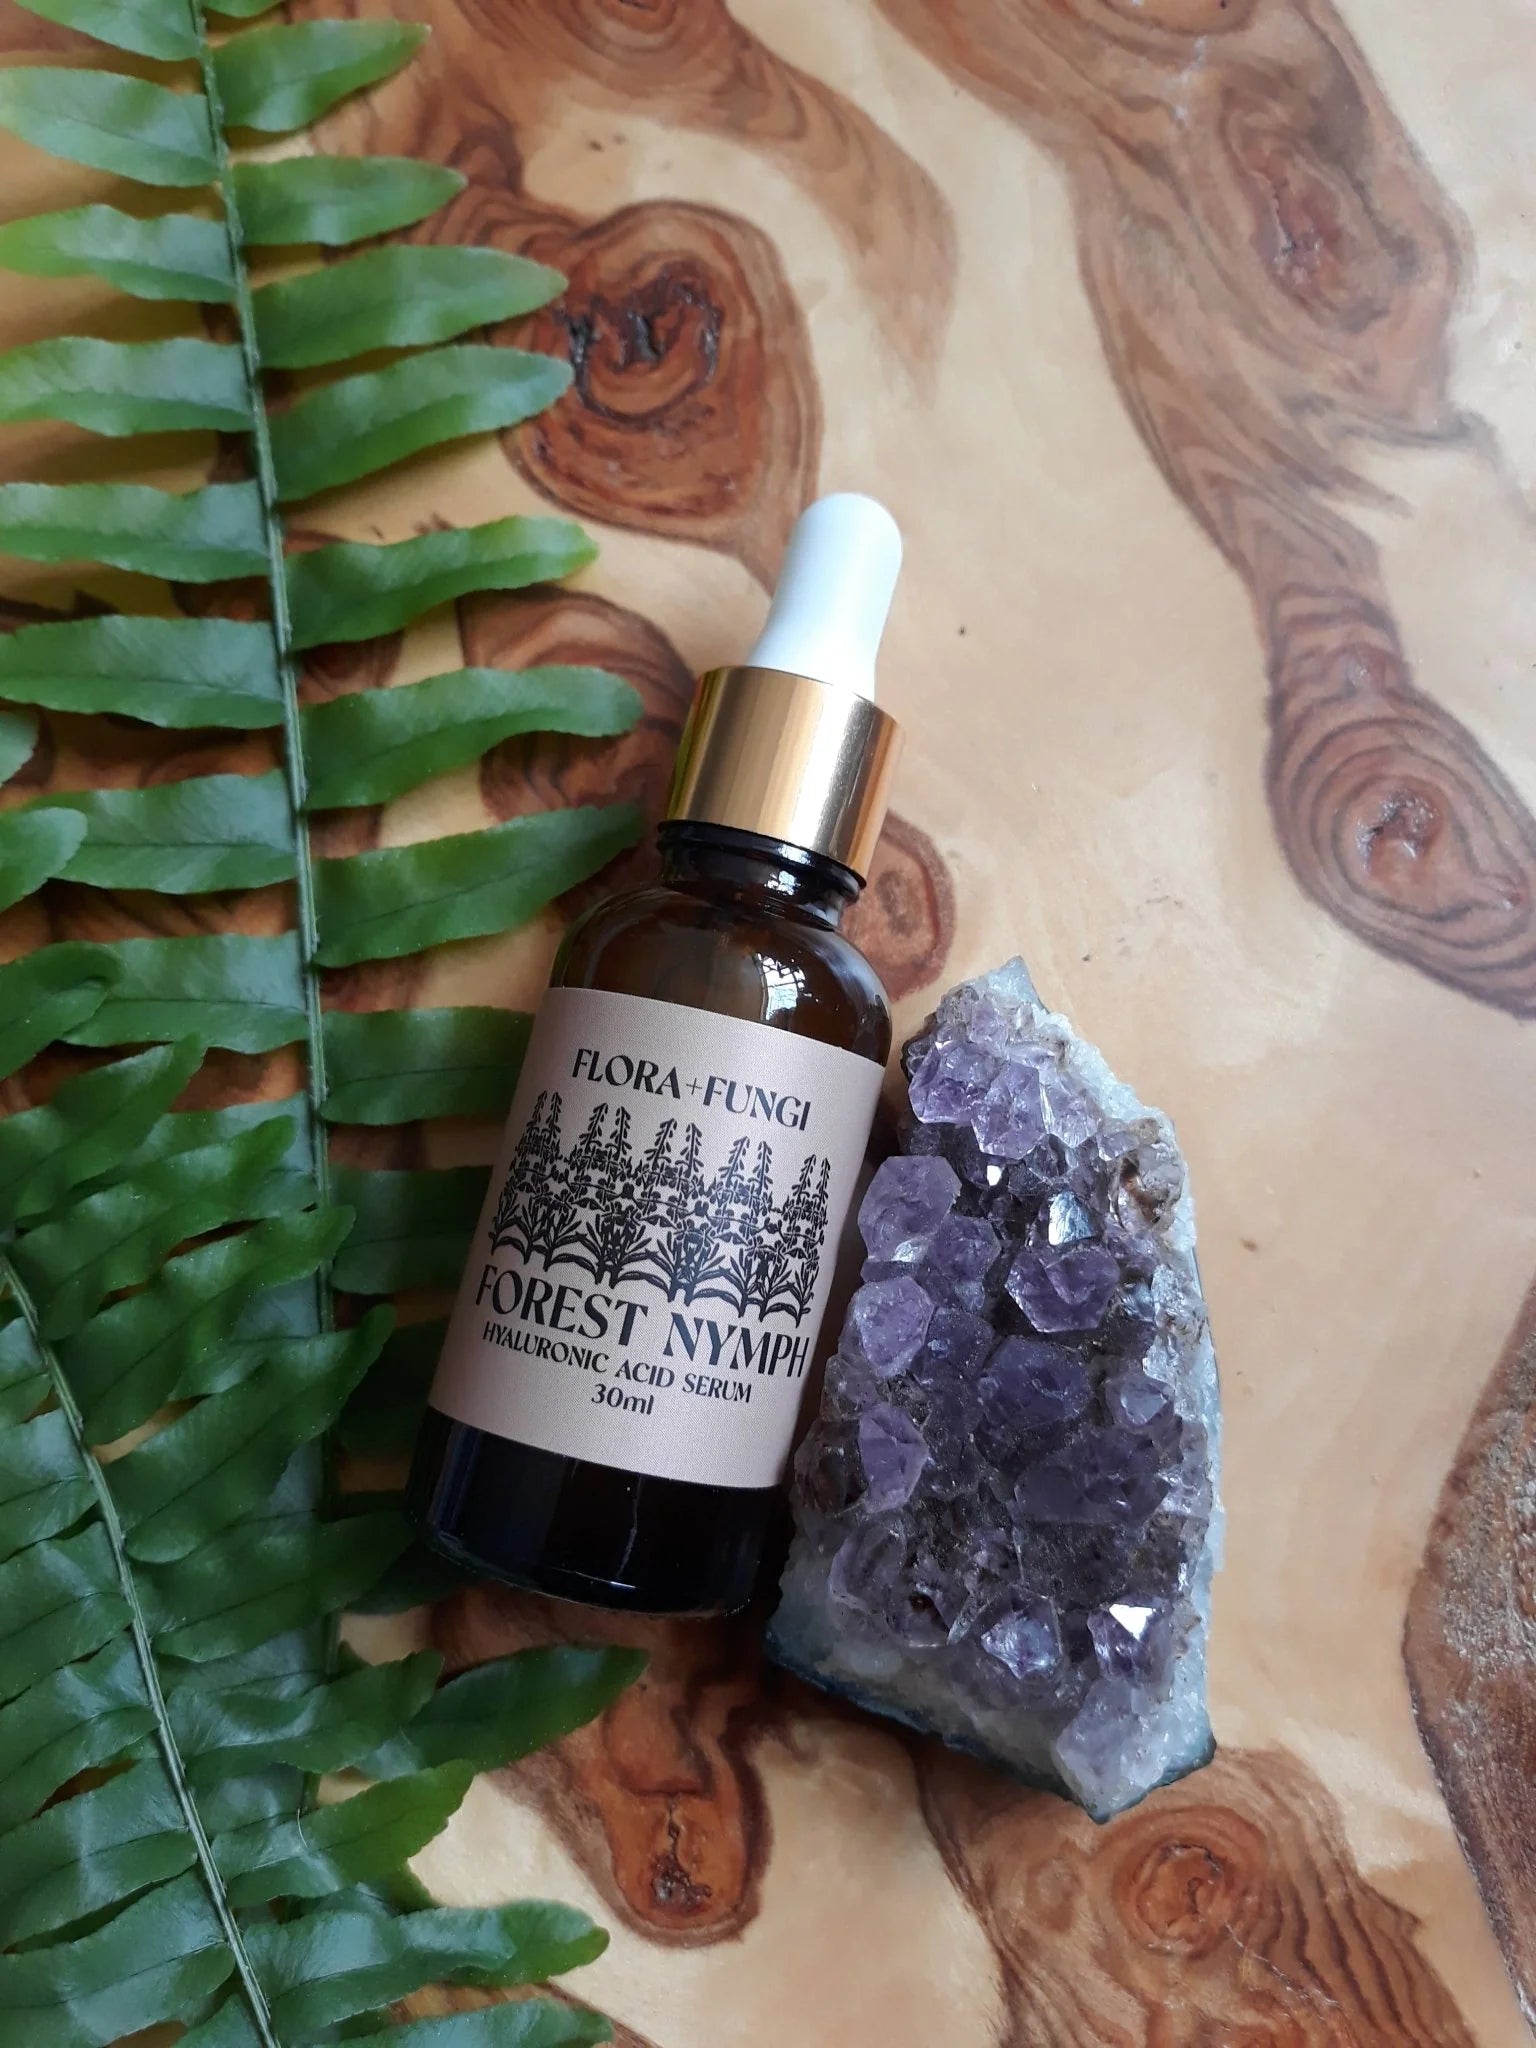 Flora+Fungi's Forest Nymph Hyaluronic Acid Serum